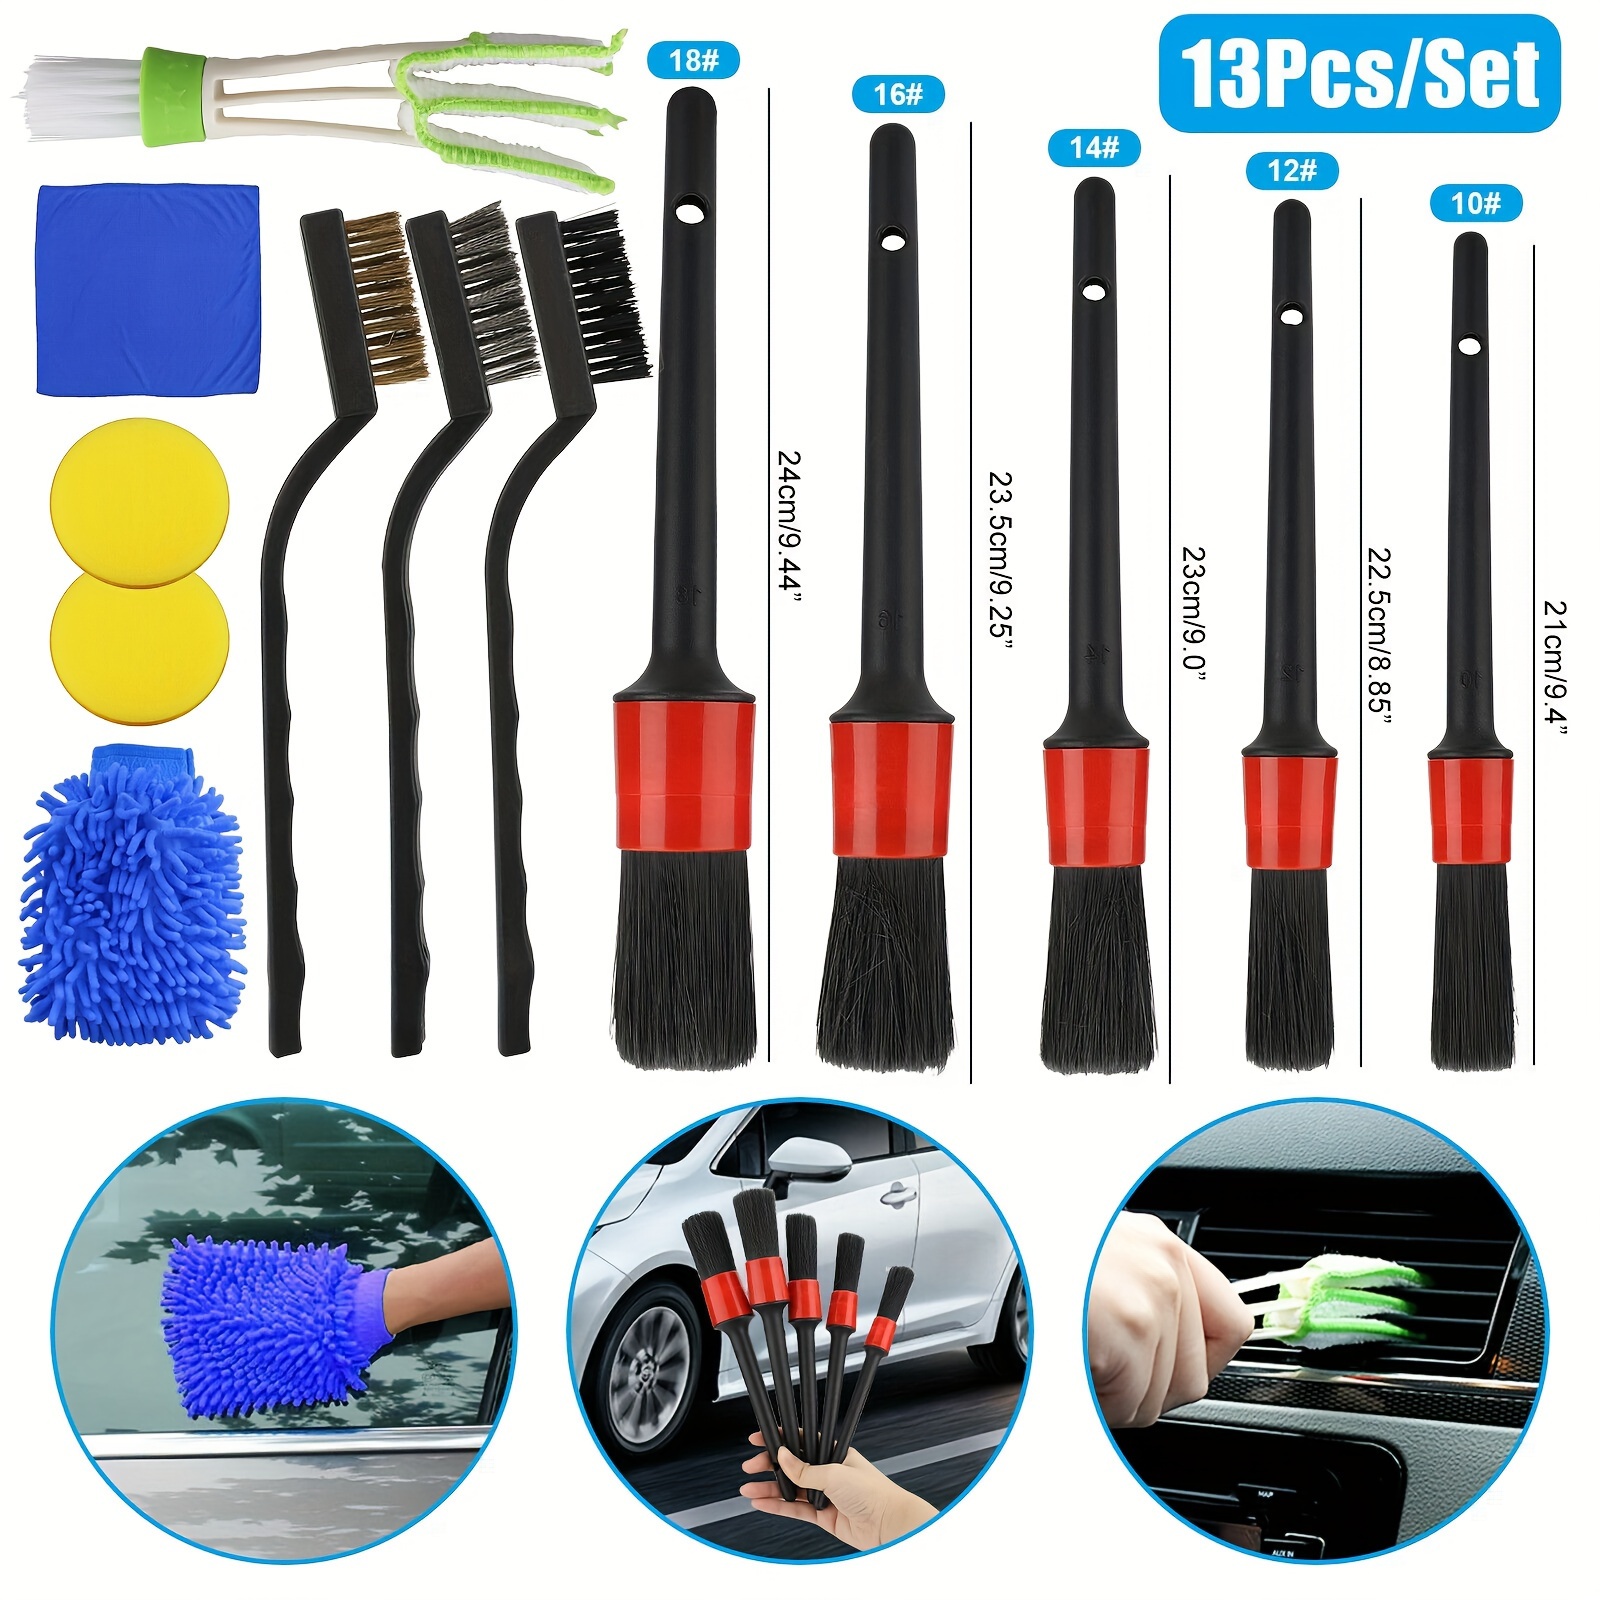 

13-piece Car & Motorcycle Detailing Brush Set - Leather, Air Vent & Dust Cleaning Tools For Interior And Exterior Maintenance